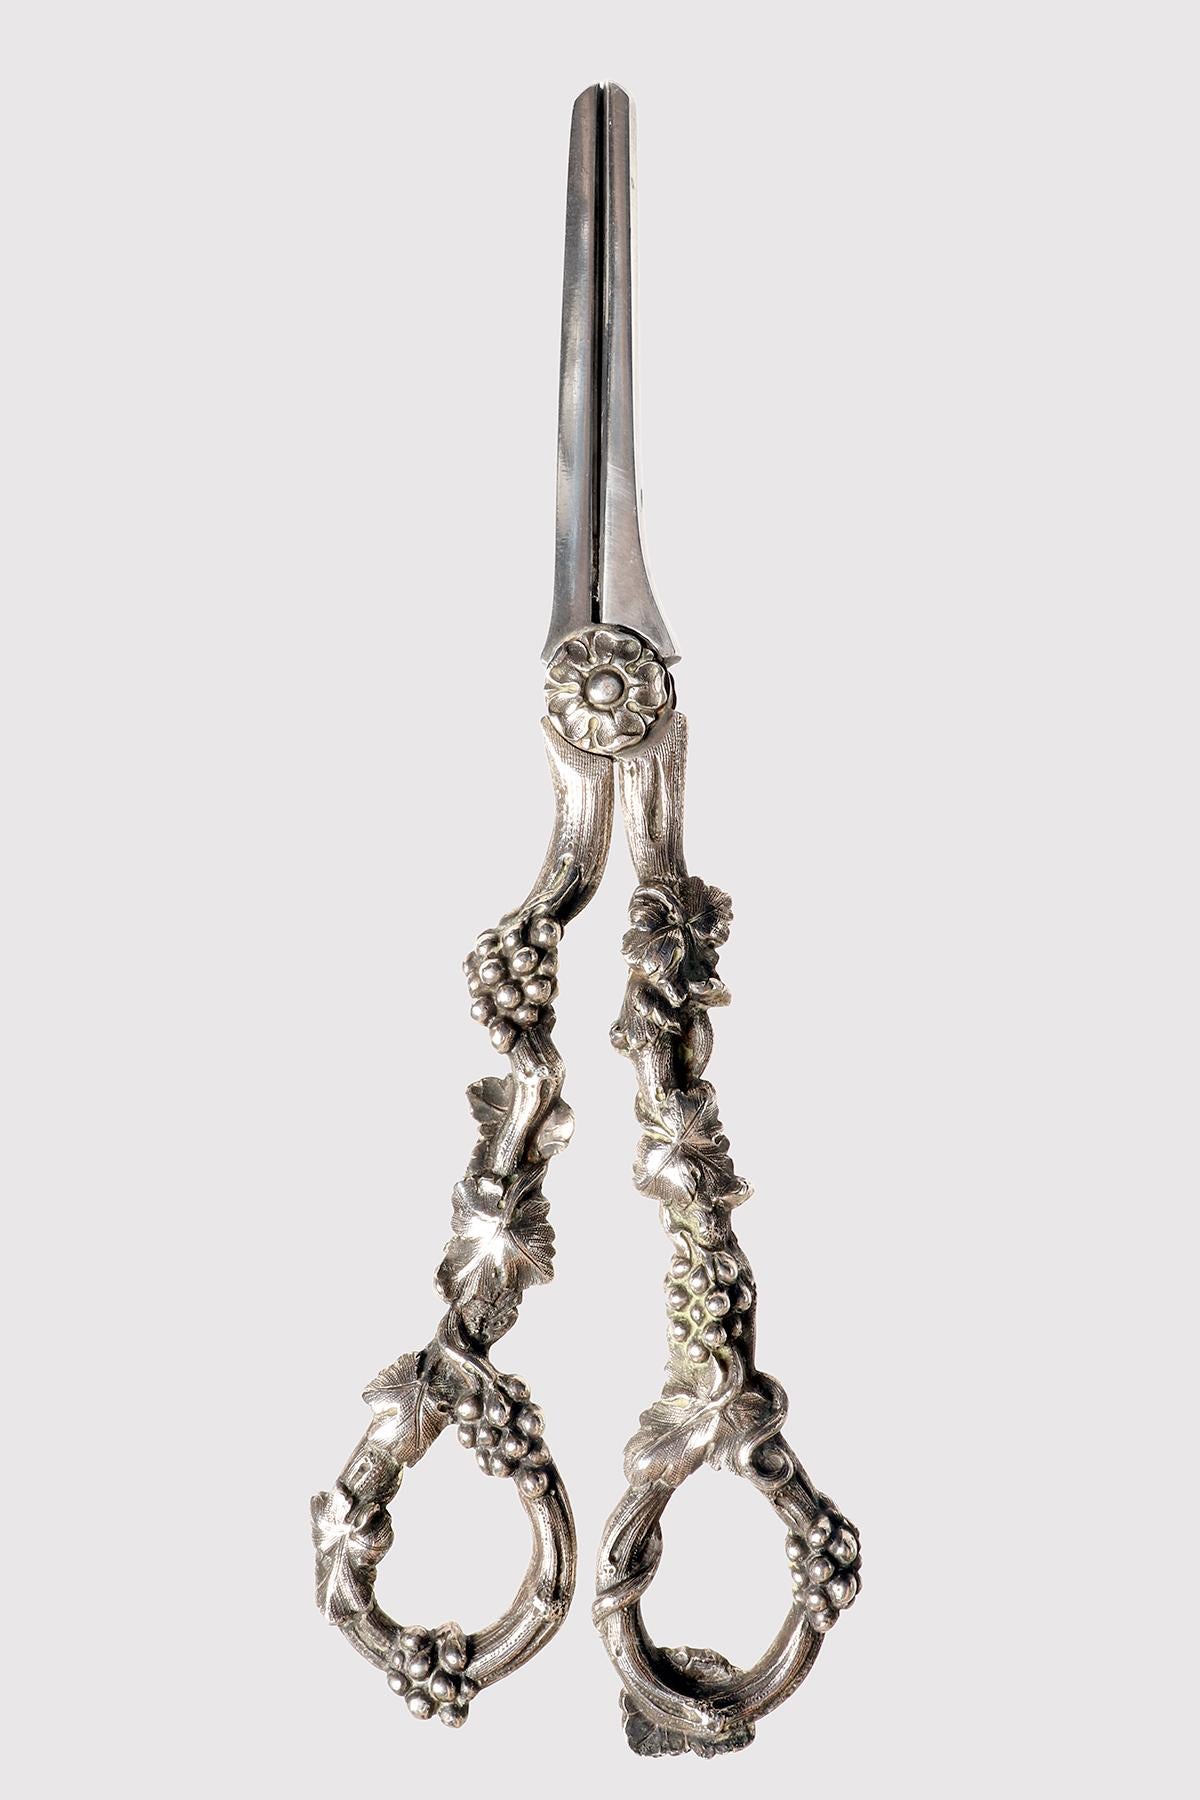 Scissors to cut the stems of the bunches of grapes presented on the table at dessert time.
Made of silver, short and quite thick blades, suitable for cutting off the stems of the bunches, with a decoration of vegetable inspiration, branches knotted